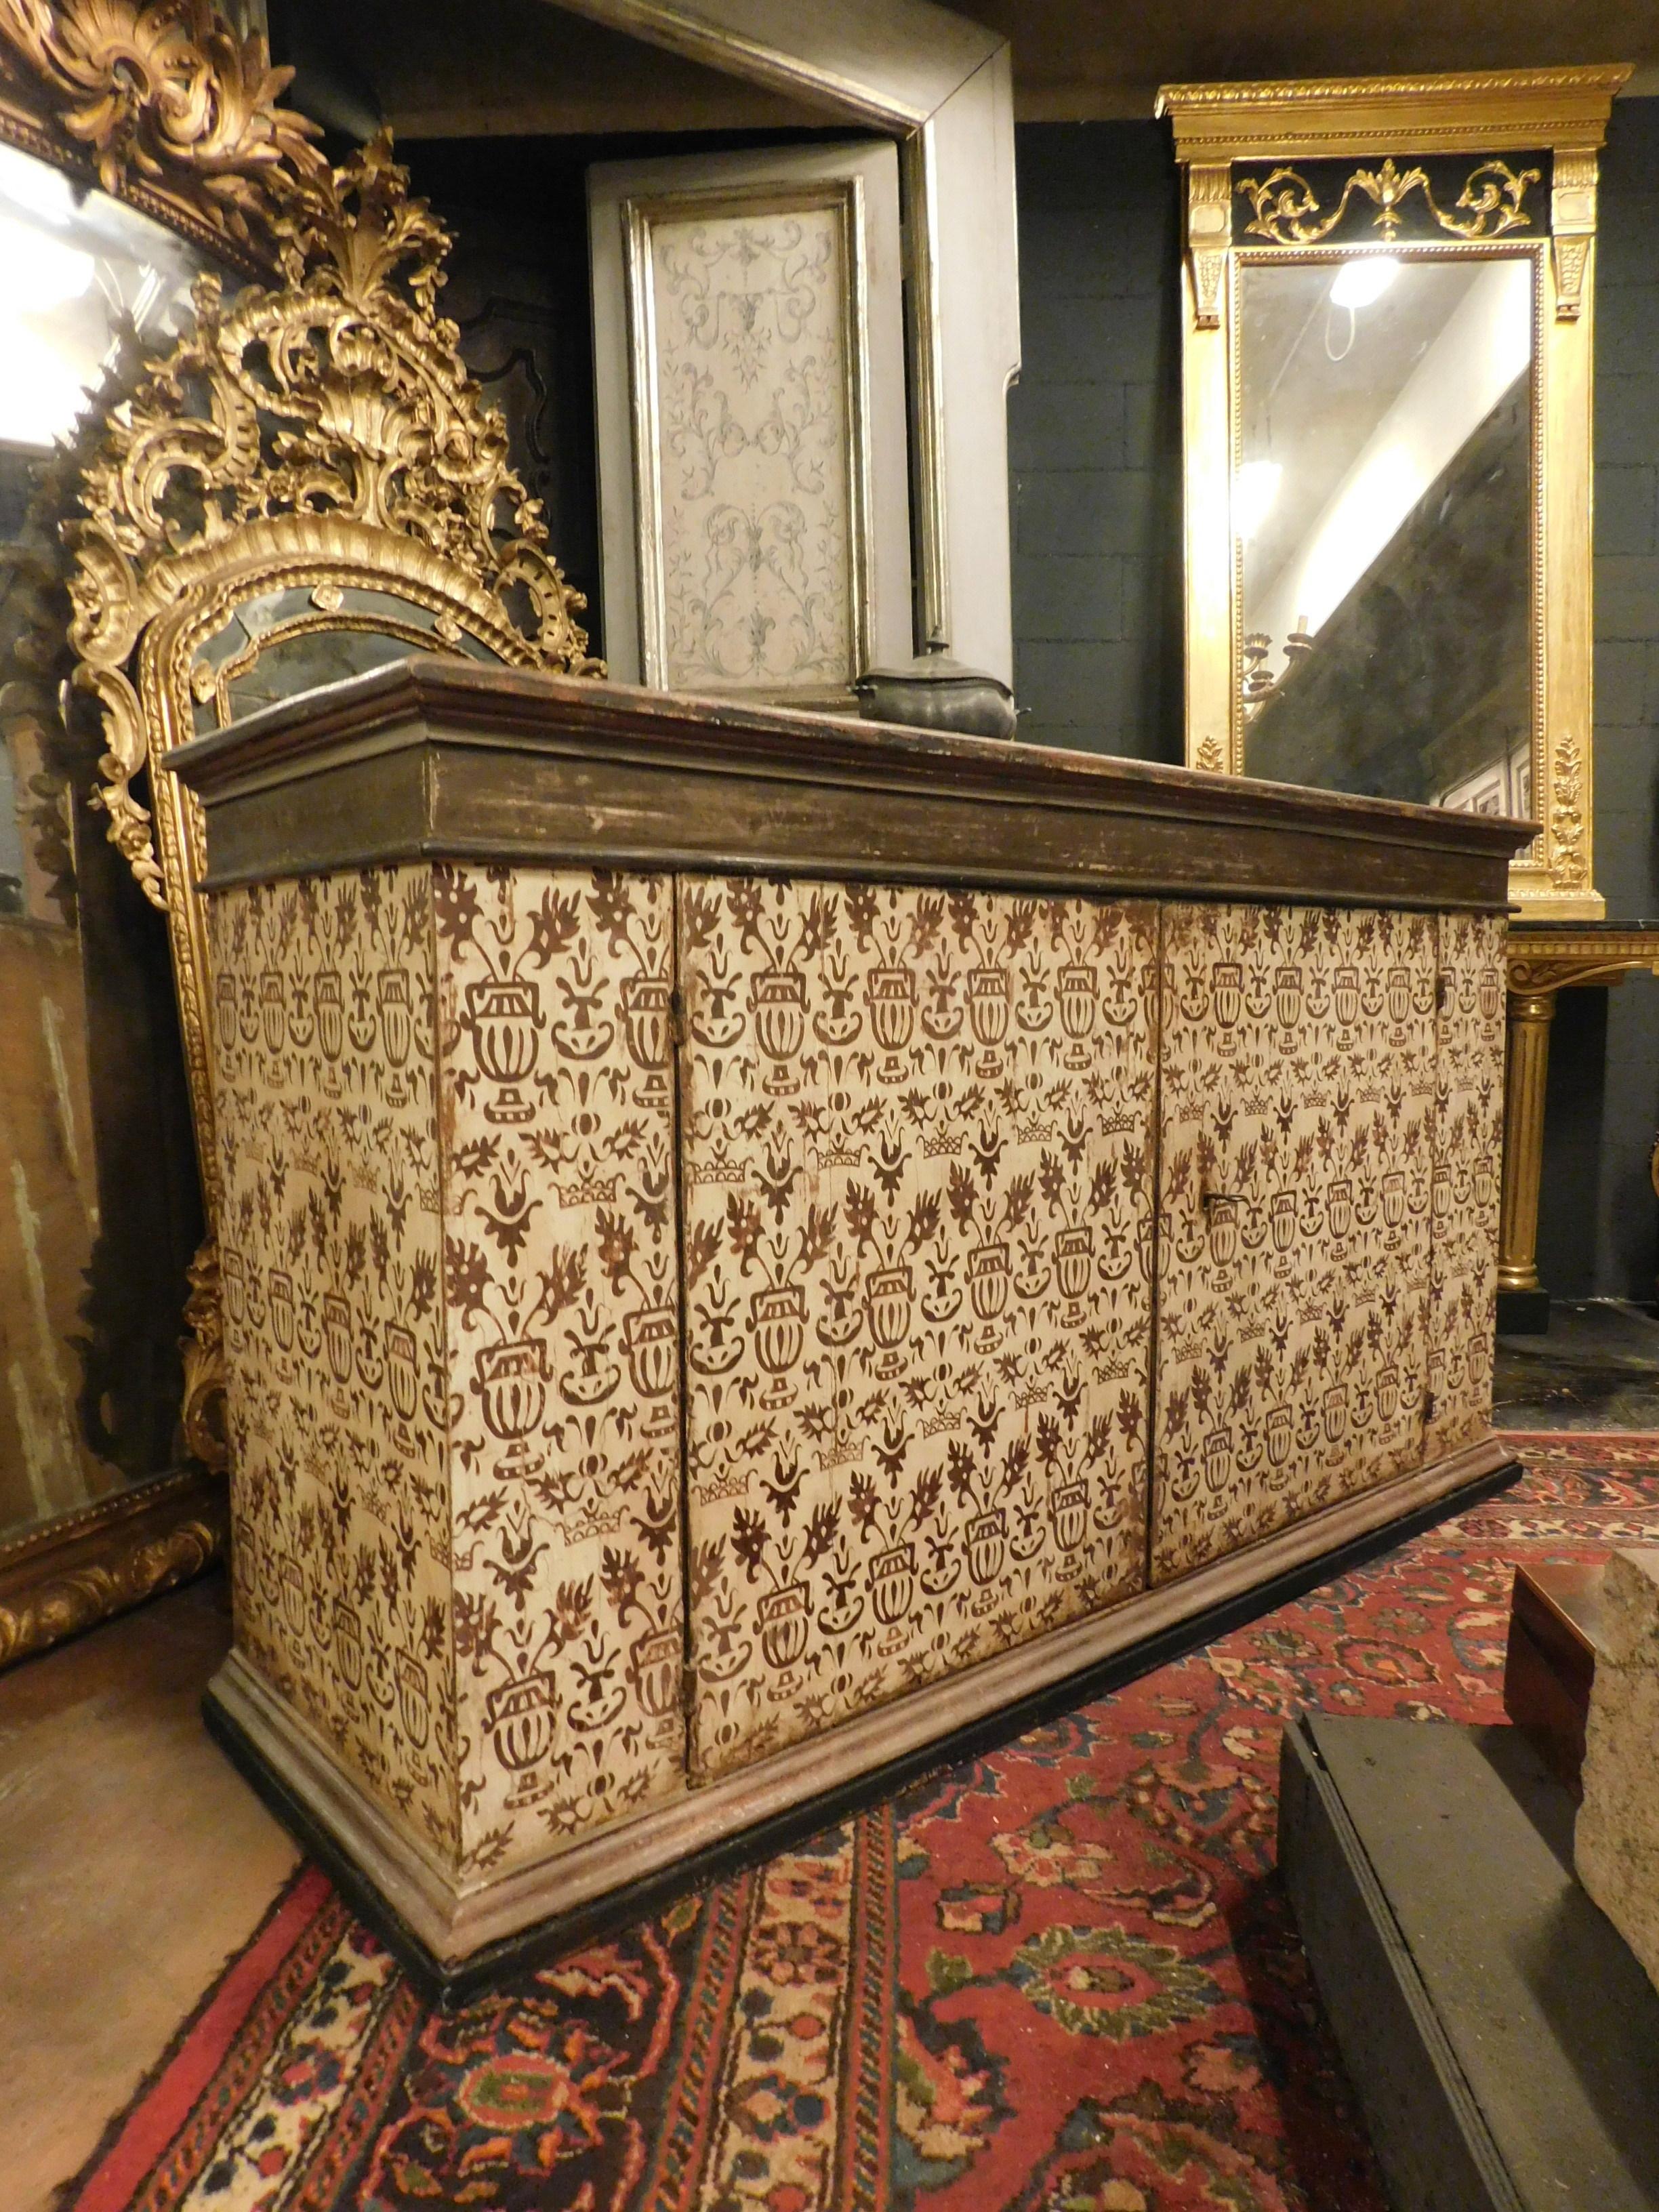 17th century sideboard